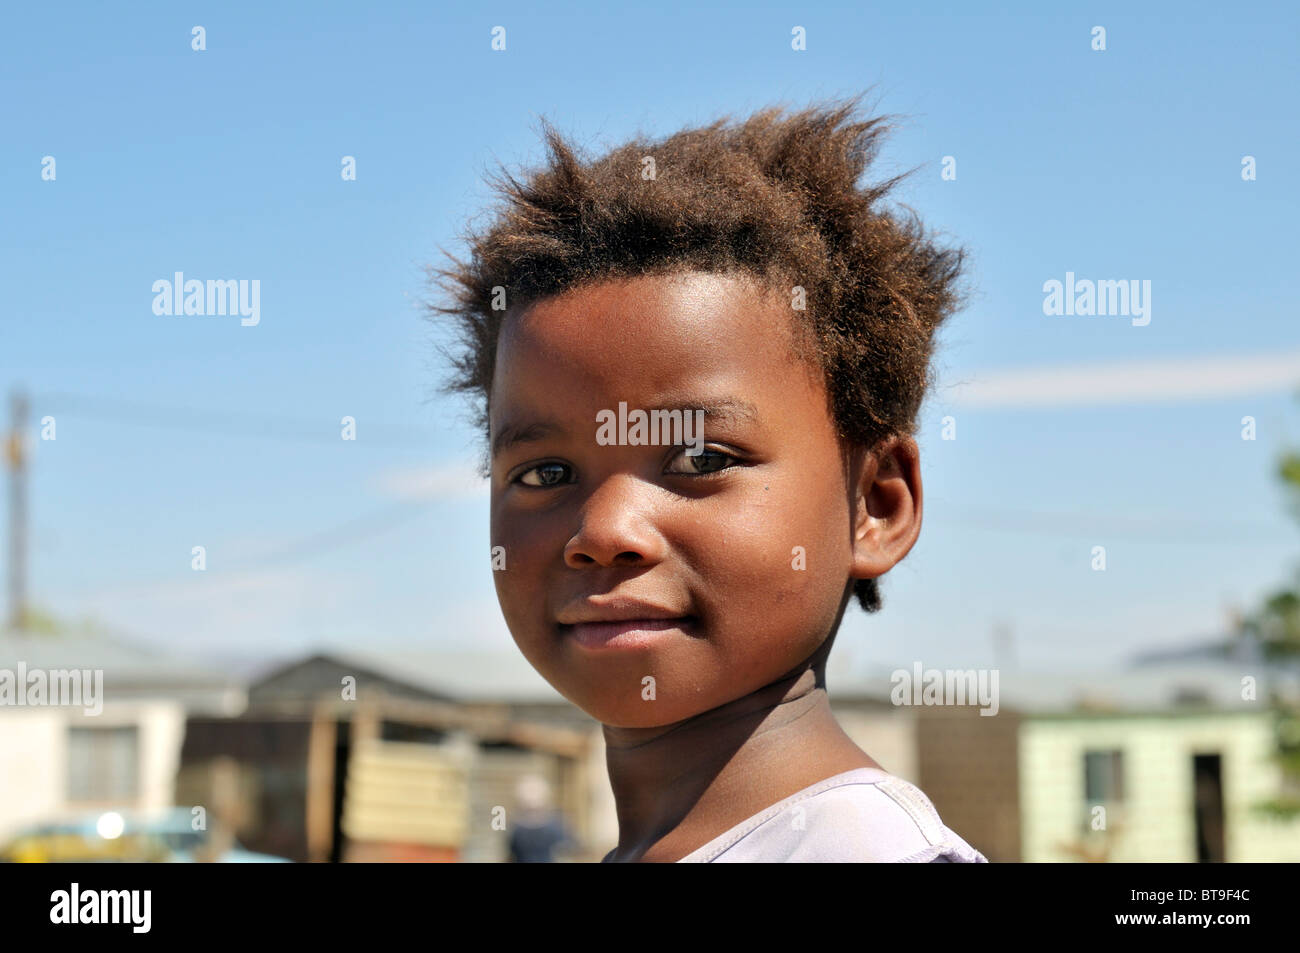 Portrait of a girl with confident gaze, slum, township, Queenstown, Eastern Cape, South Africa, Africa Stock Photo